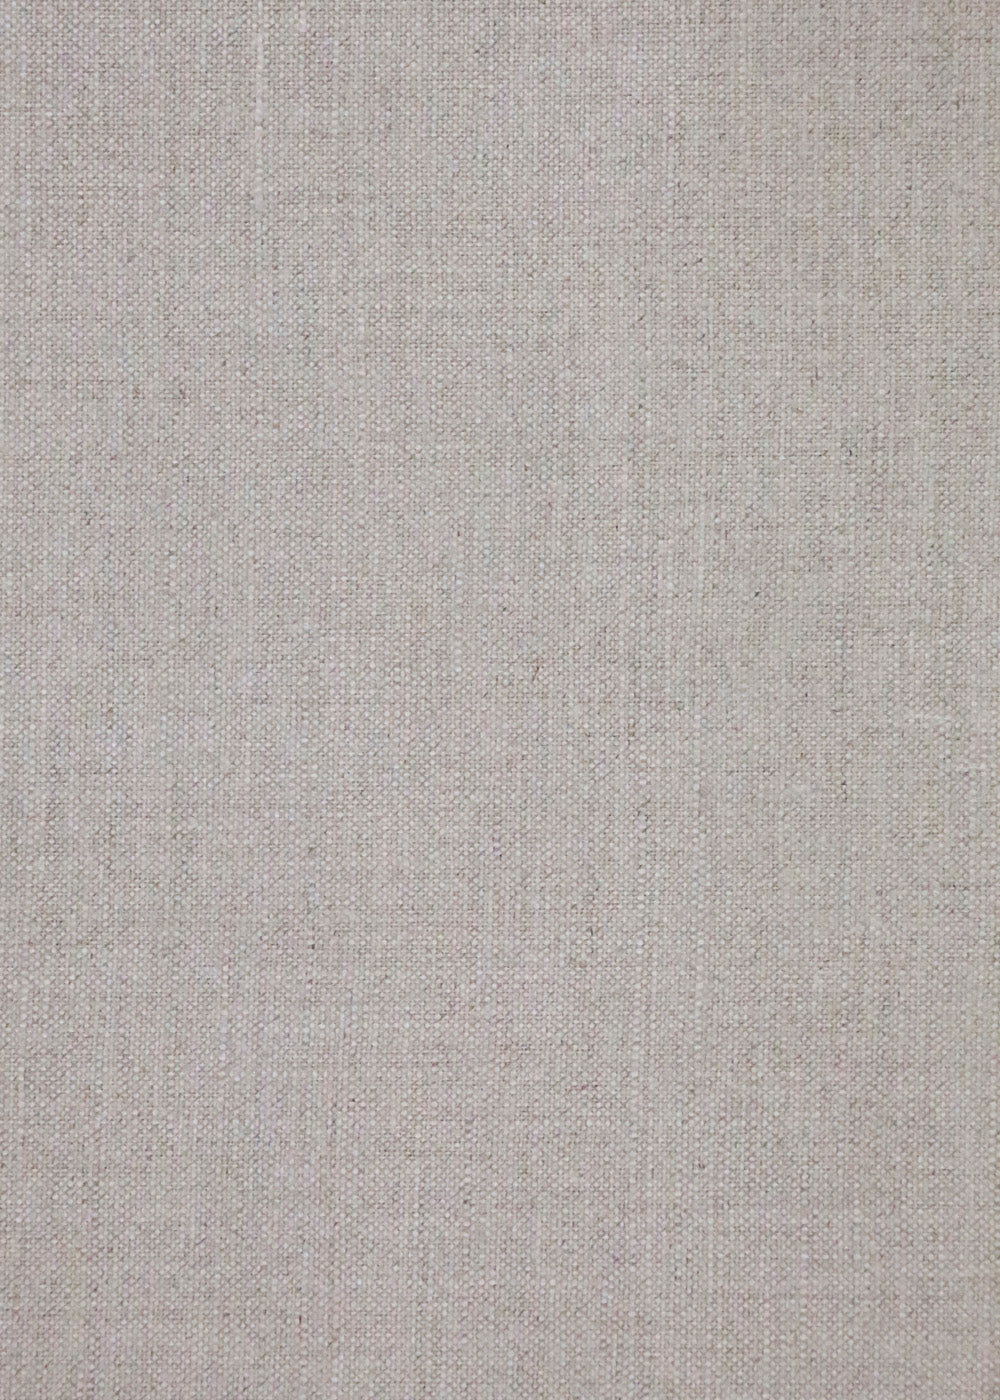 beige linen fabric with a glazed finish